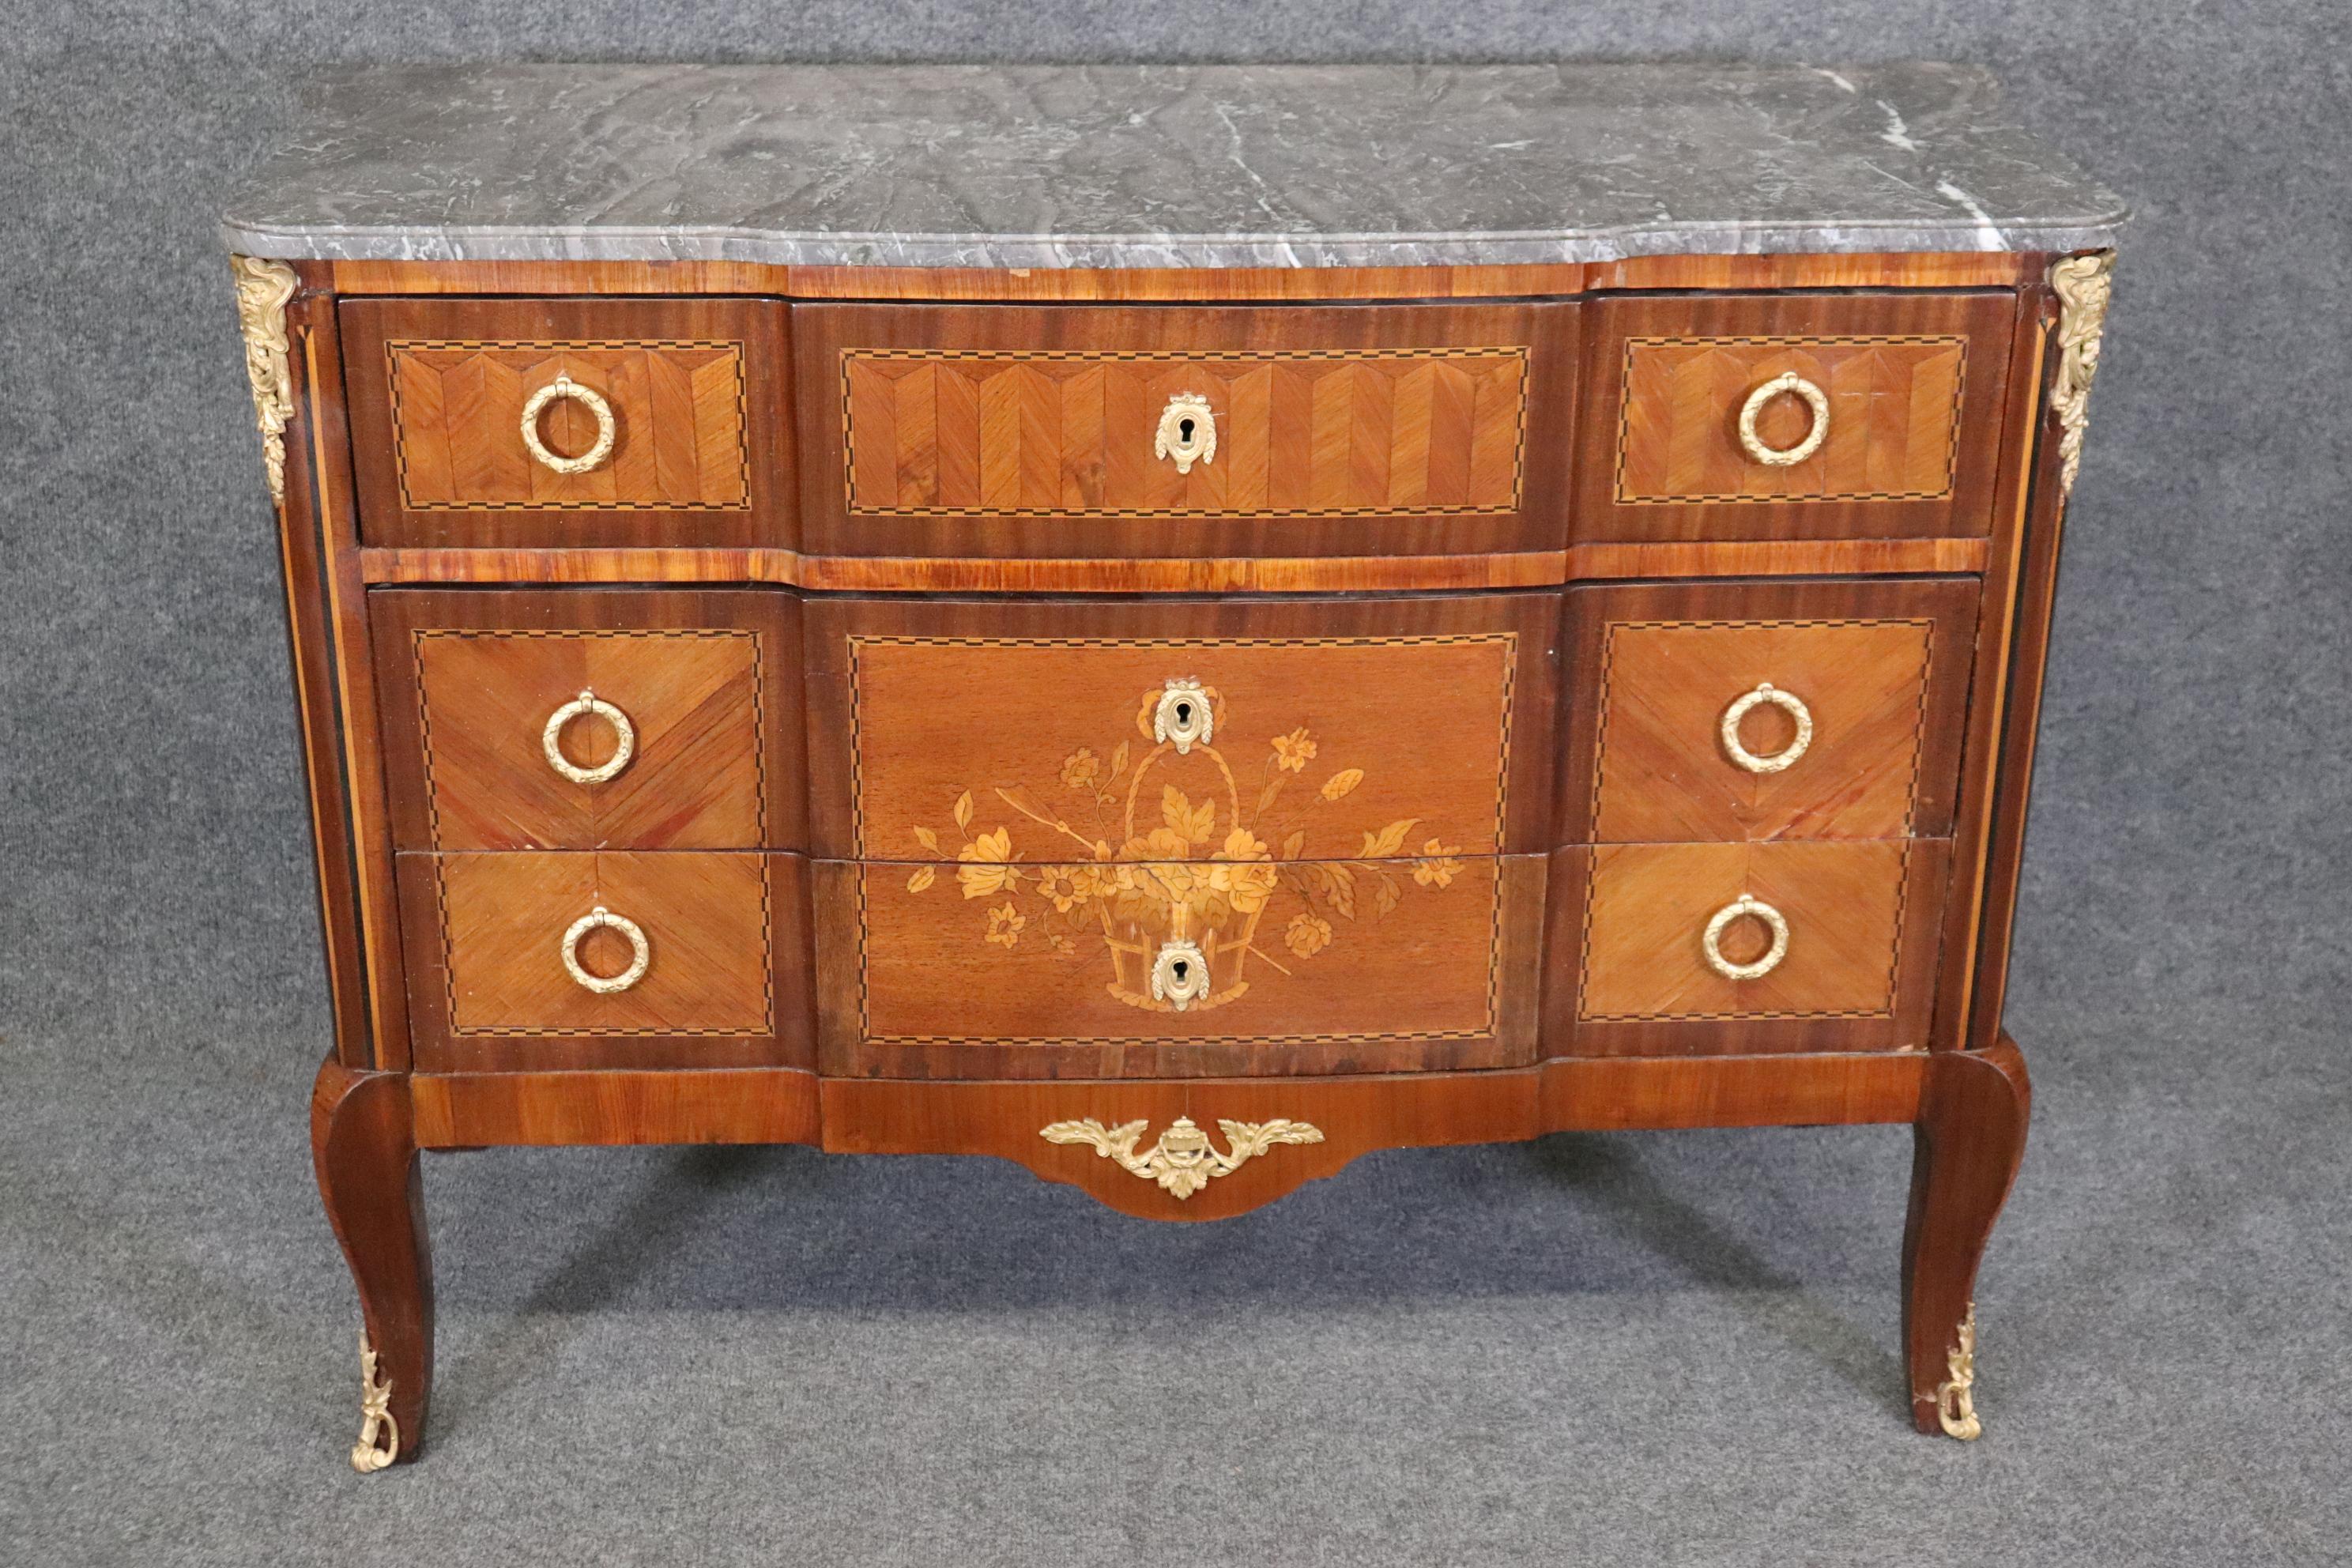 Dimensions: Height: 33 1/2 in Width: 45 3/4 in Depth: 19 1/2 in 

This antique 19th century French Louis XV style marble top commode, chest of drawers is a great example of quality French furniture! If you look at the photos provided, you will see